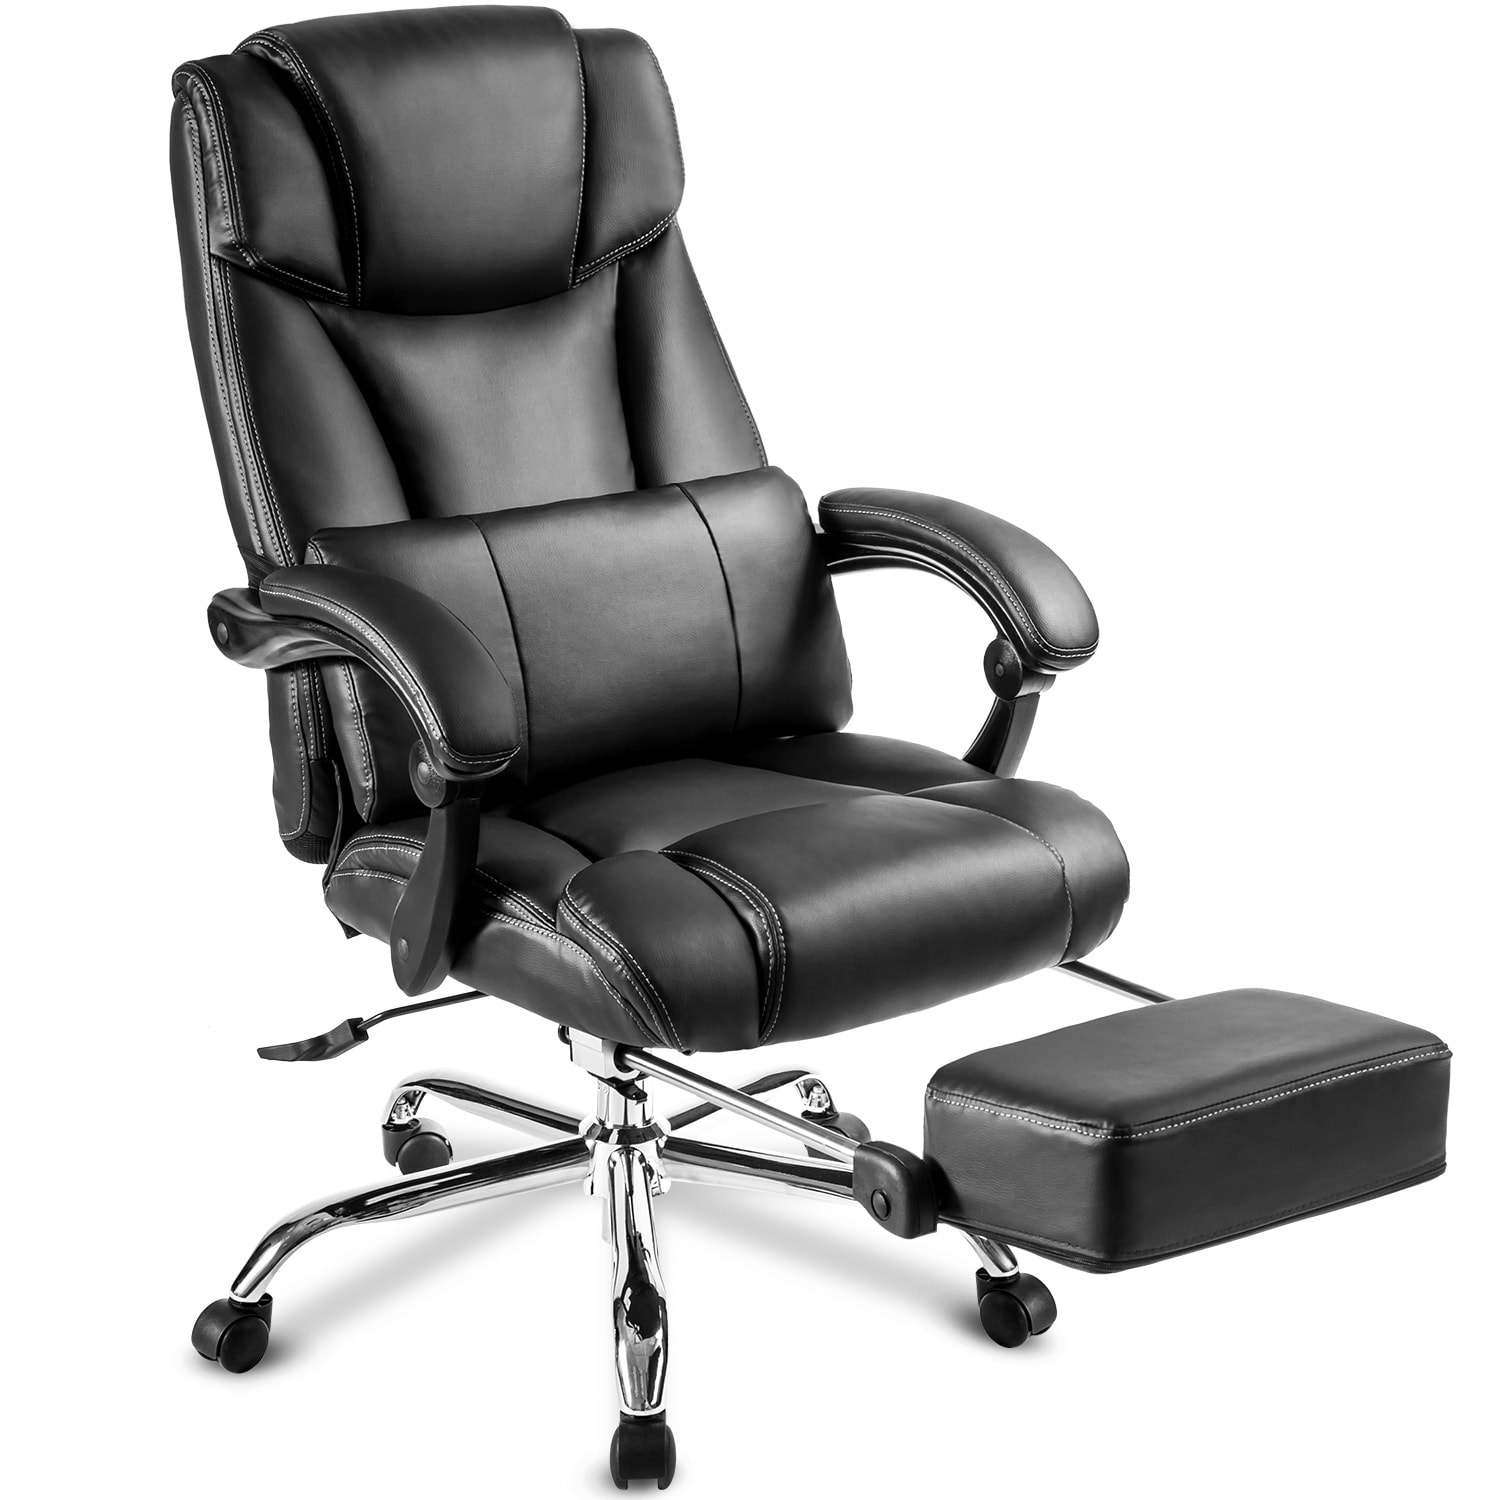 https://ak1.ostkcdn.com/images/products/is/images/direct/3ae8306e67b5b85b188c6b26061dd0d665f75c53/EYIW-Adjustable-Height-Double-Padded-Office-Chair-%2C-Adjustable-Back-Swivel-Arm-Desk-Chair-with-Support-Cushion-and-Footrest.jpg